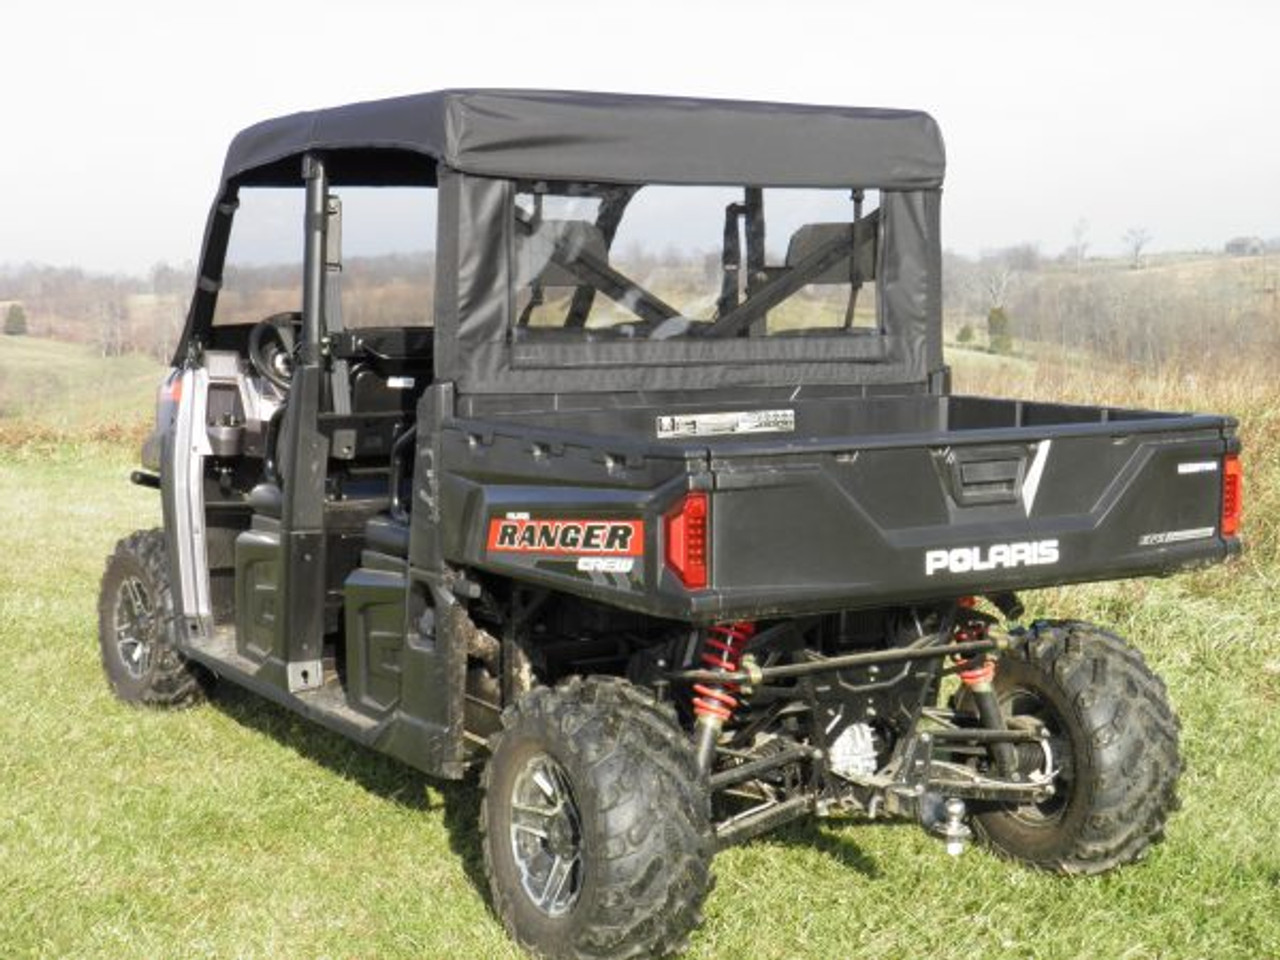 3 Star side x side Polaris Ranger Crew 570-4 vinyl windshield top and rear window rear angle view